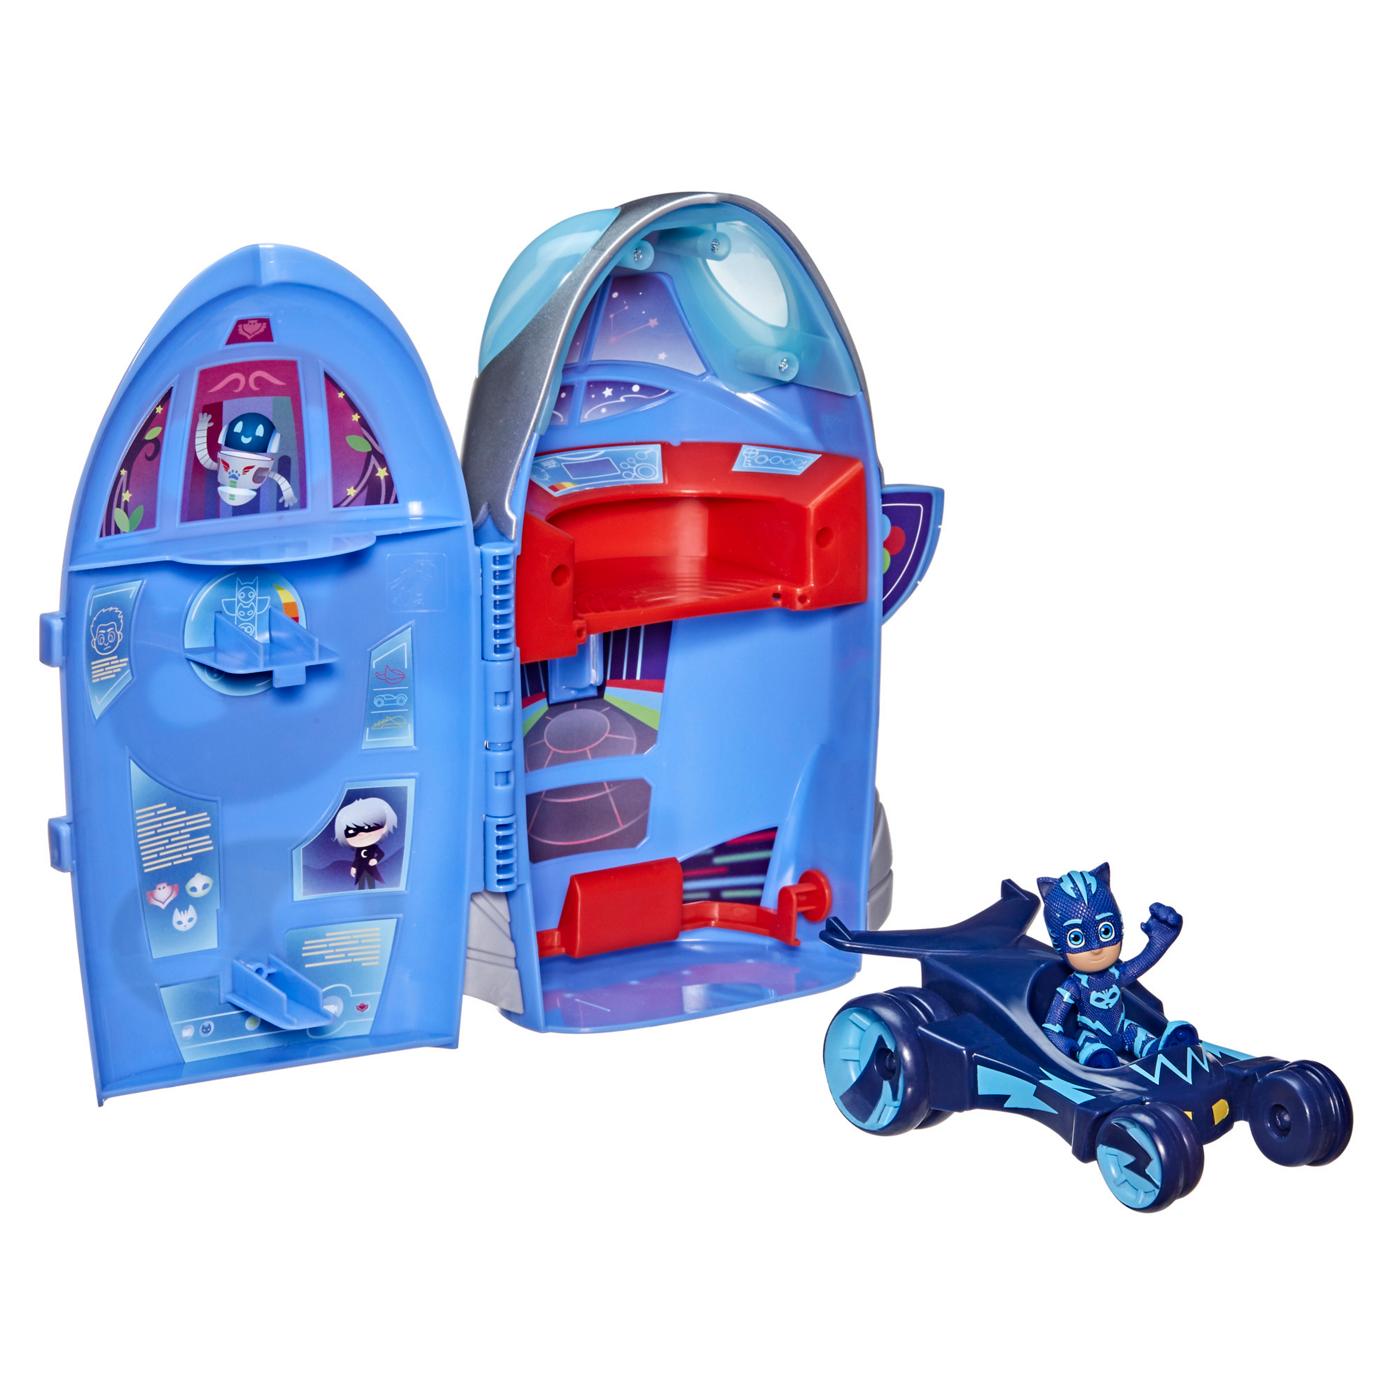 PJ Masks 2-in-1 HQ Playset; image 2 of 3